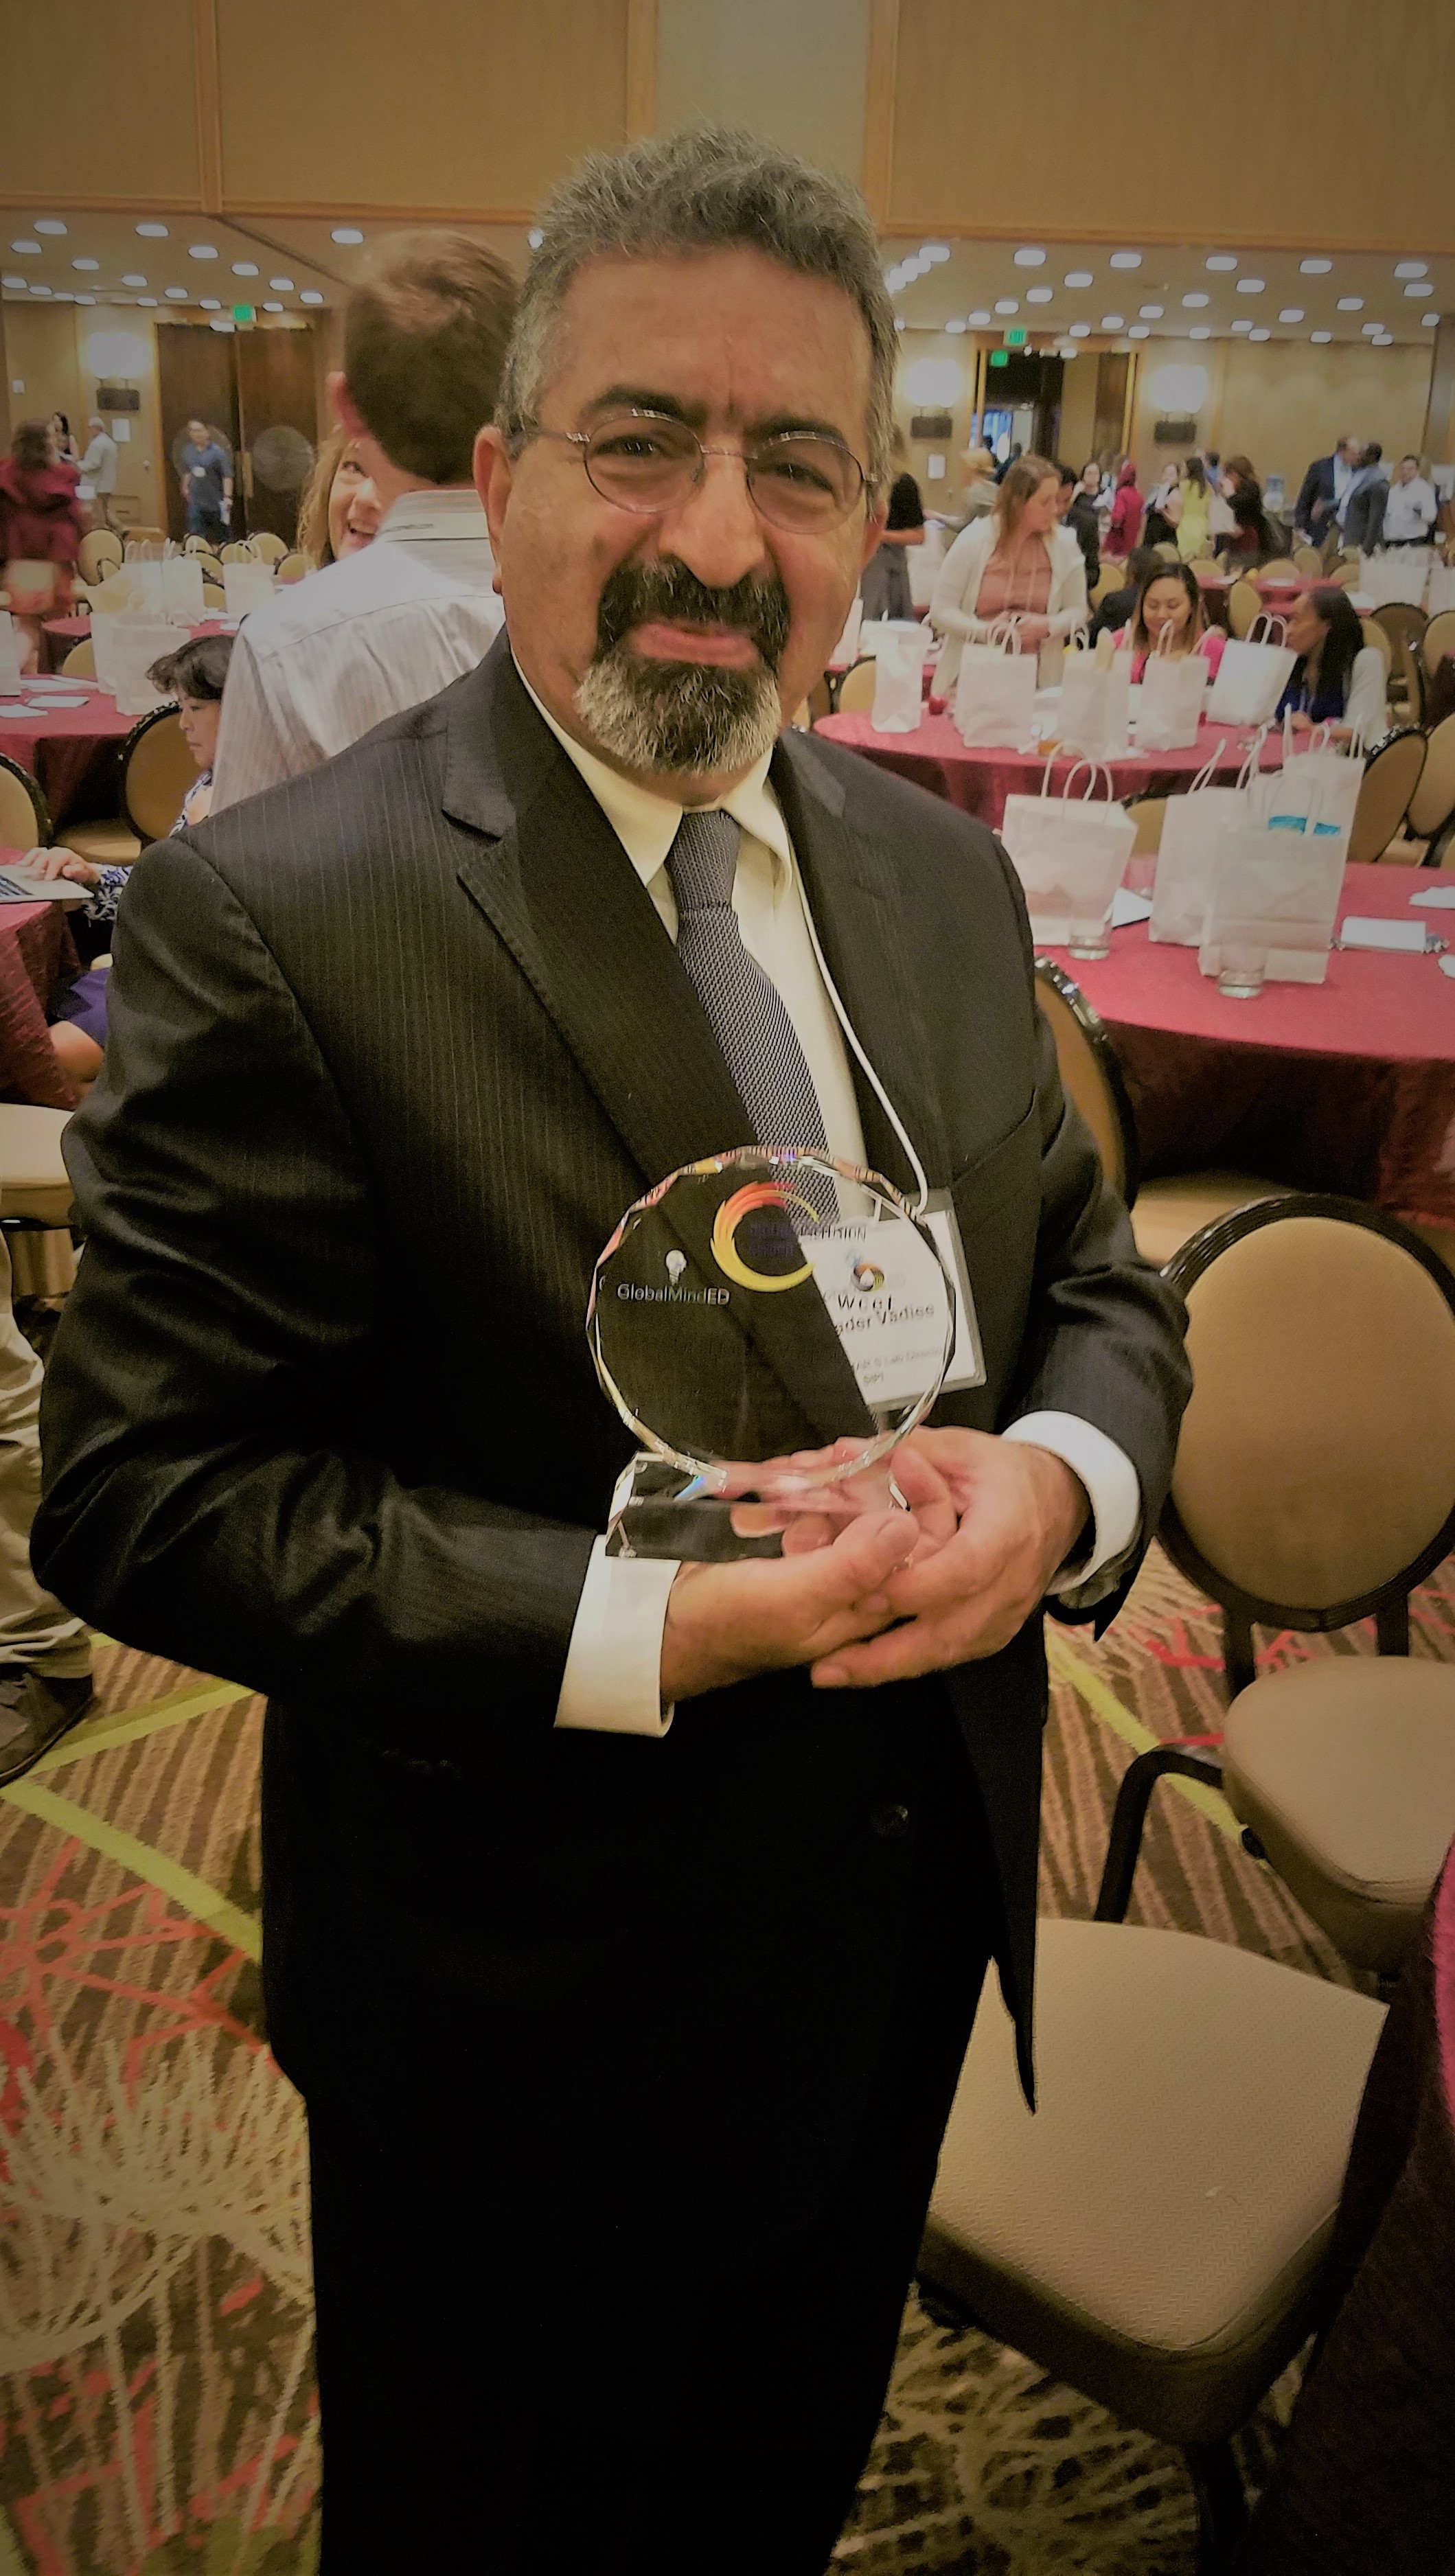 Dr. Vadiee holding Digital Inclusion Award